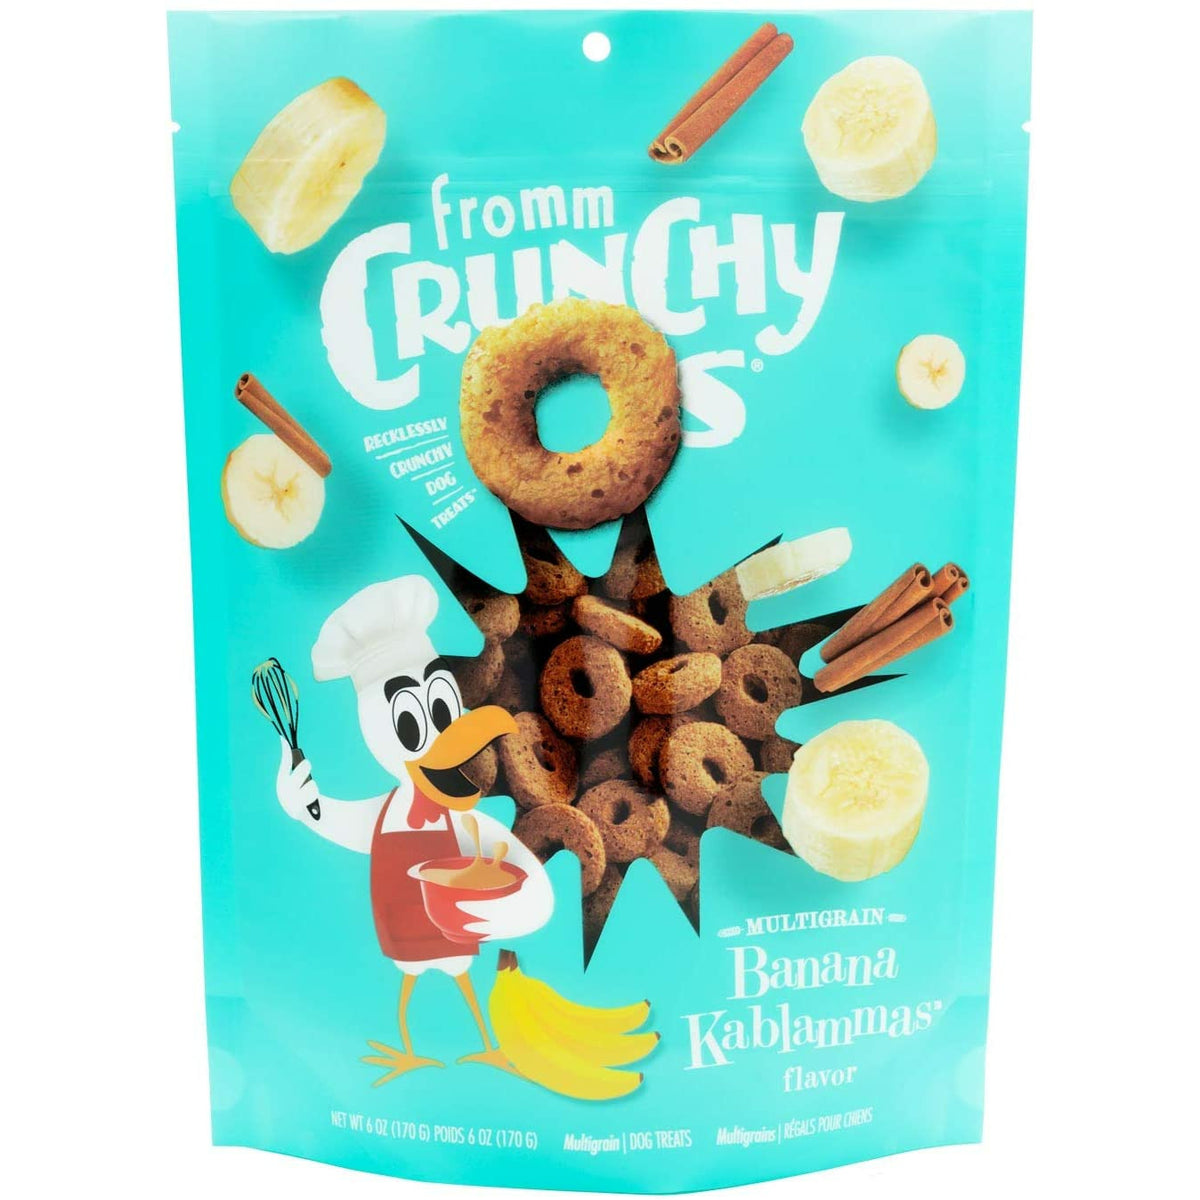 Fromm Crunchy Os - Banana Kablama (bananes) - Gâteries pour chiens (6oz)